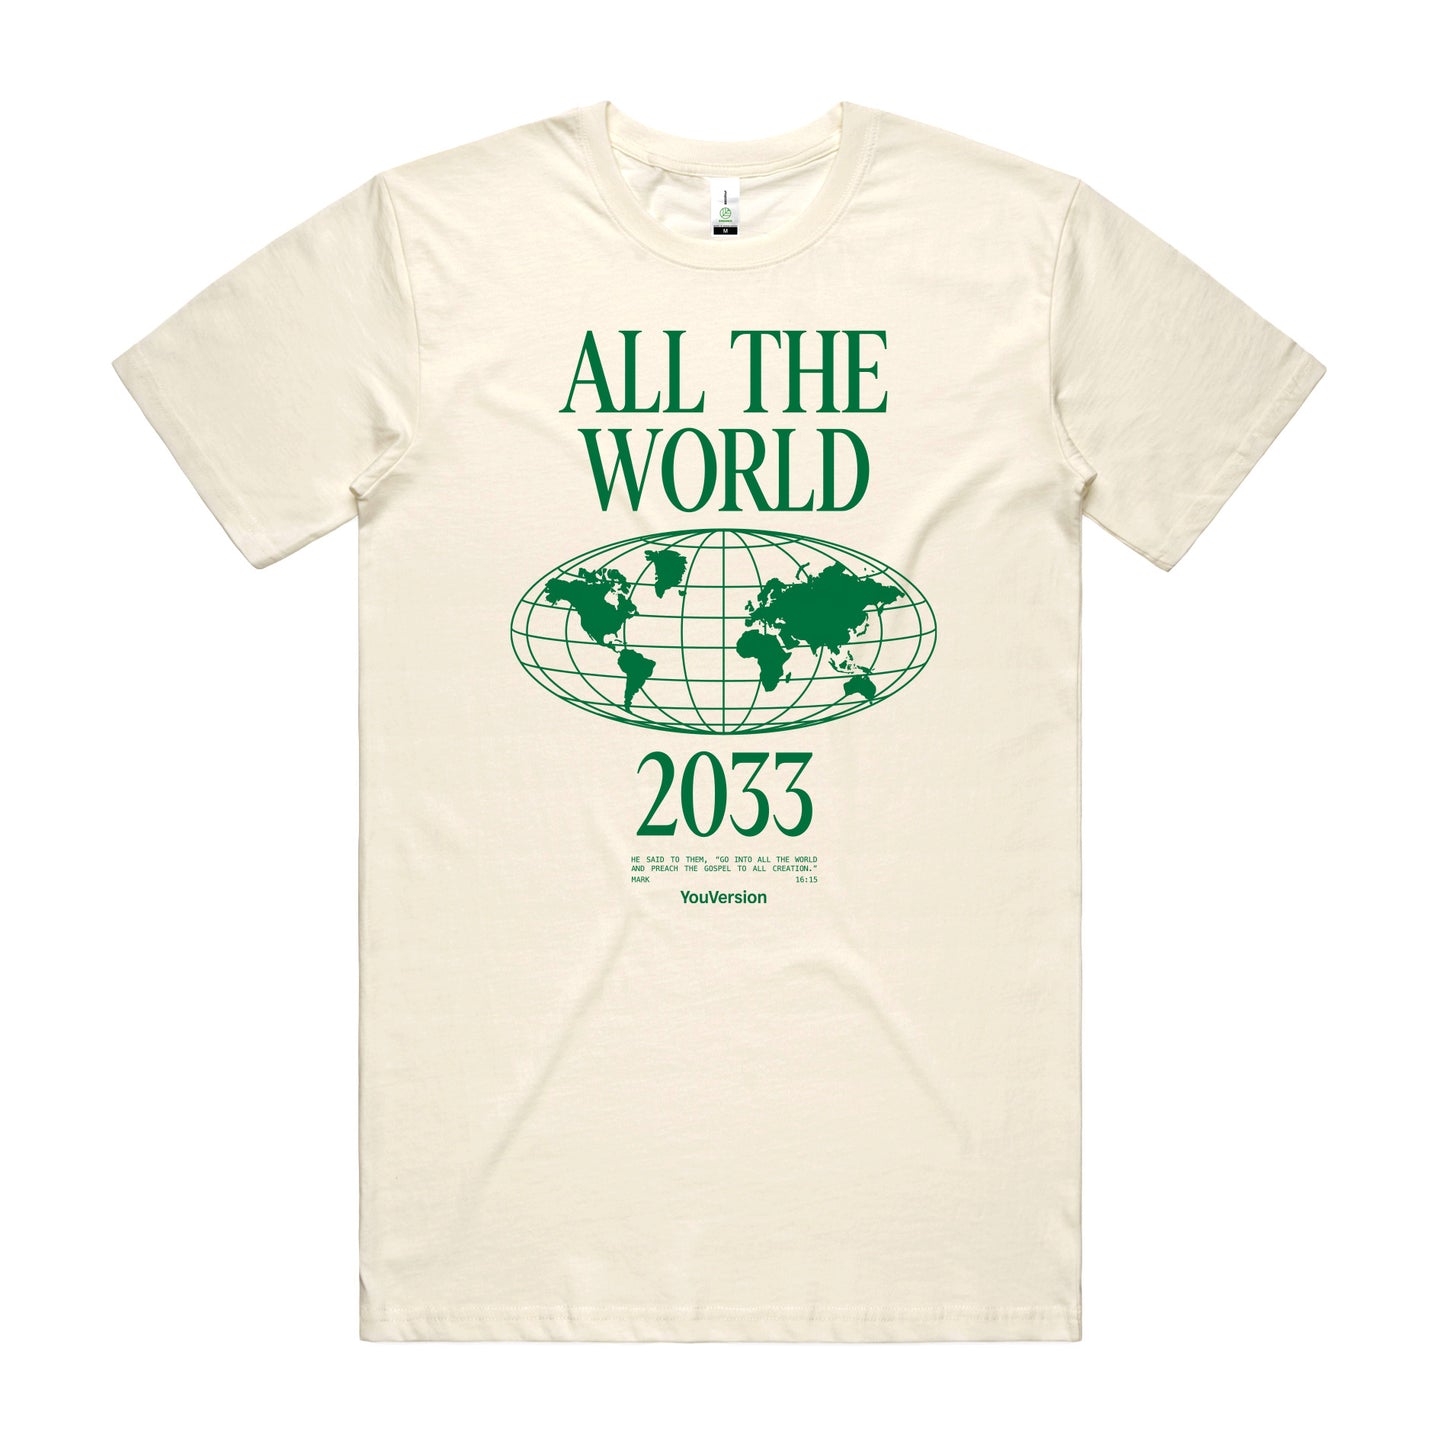 Cream colored shirt with green print that says "ALL THE WORLD" with a world map below and "2033" underneath.